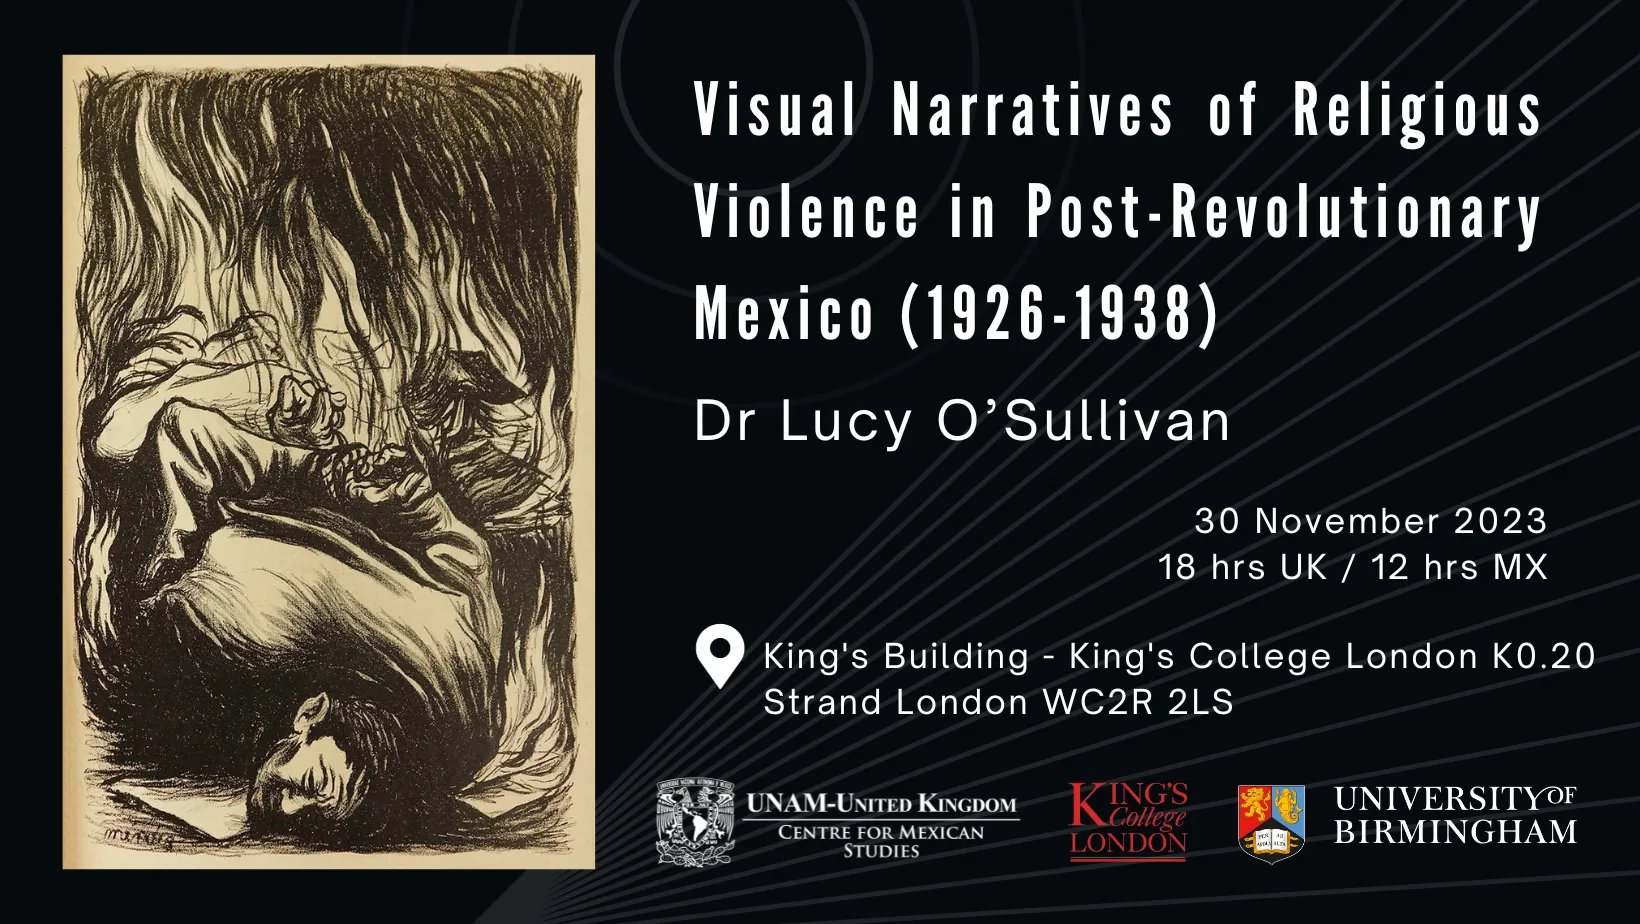 Visual Narratives of Religious Violence in Post-Revolutionary Mexico 1